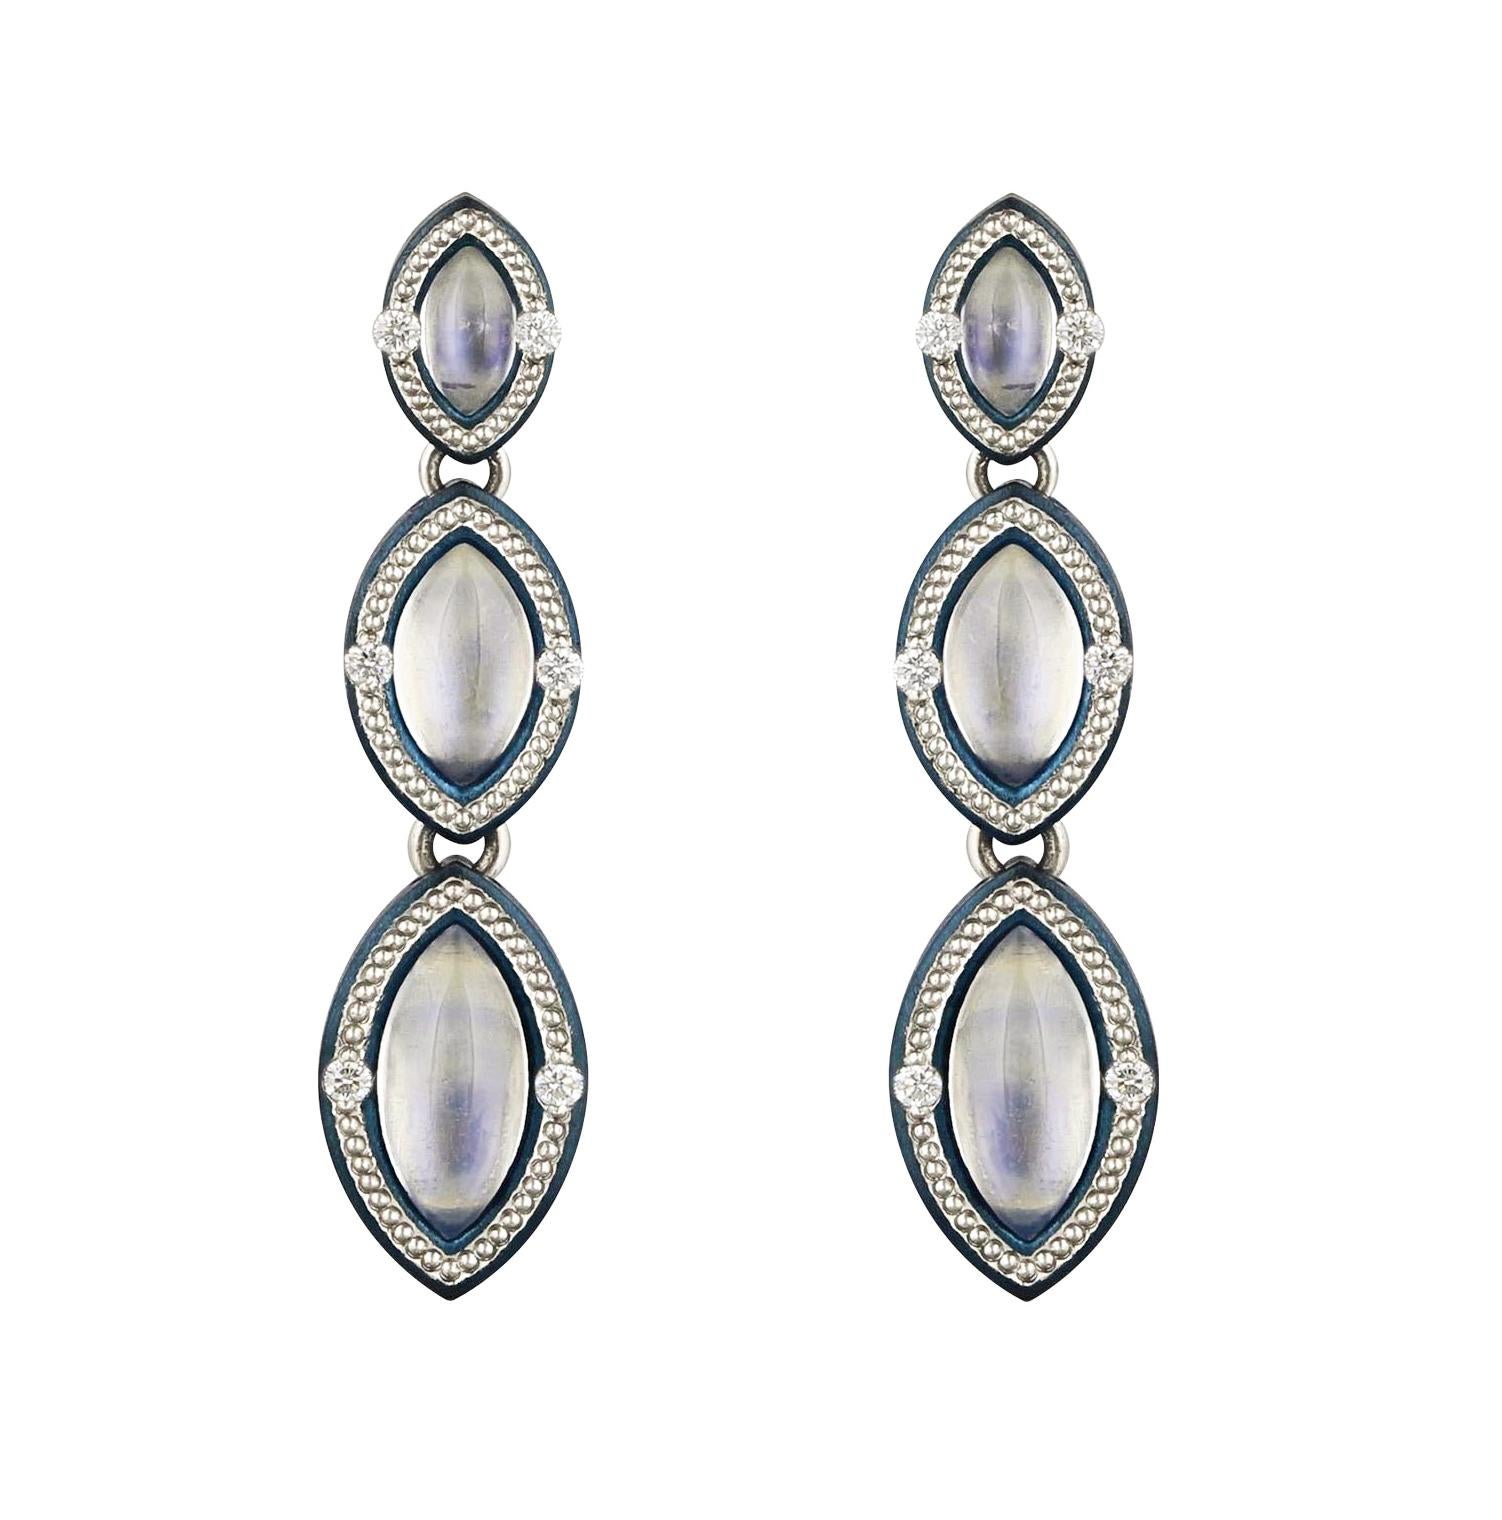 Marquise Moonstone Drop Earrings in Cobalt Blue Zirconium by Zoltan David In New Condition For Sale In Austin, TX